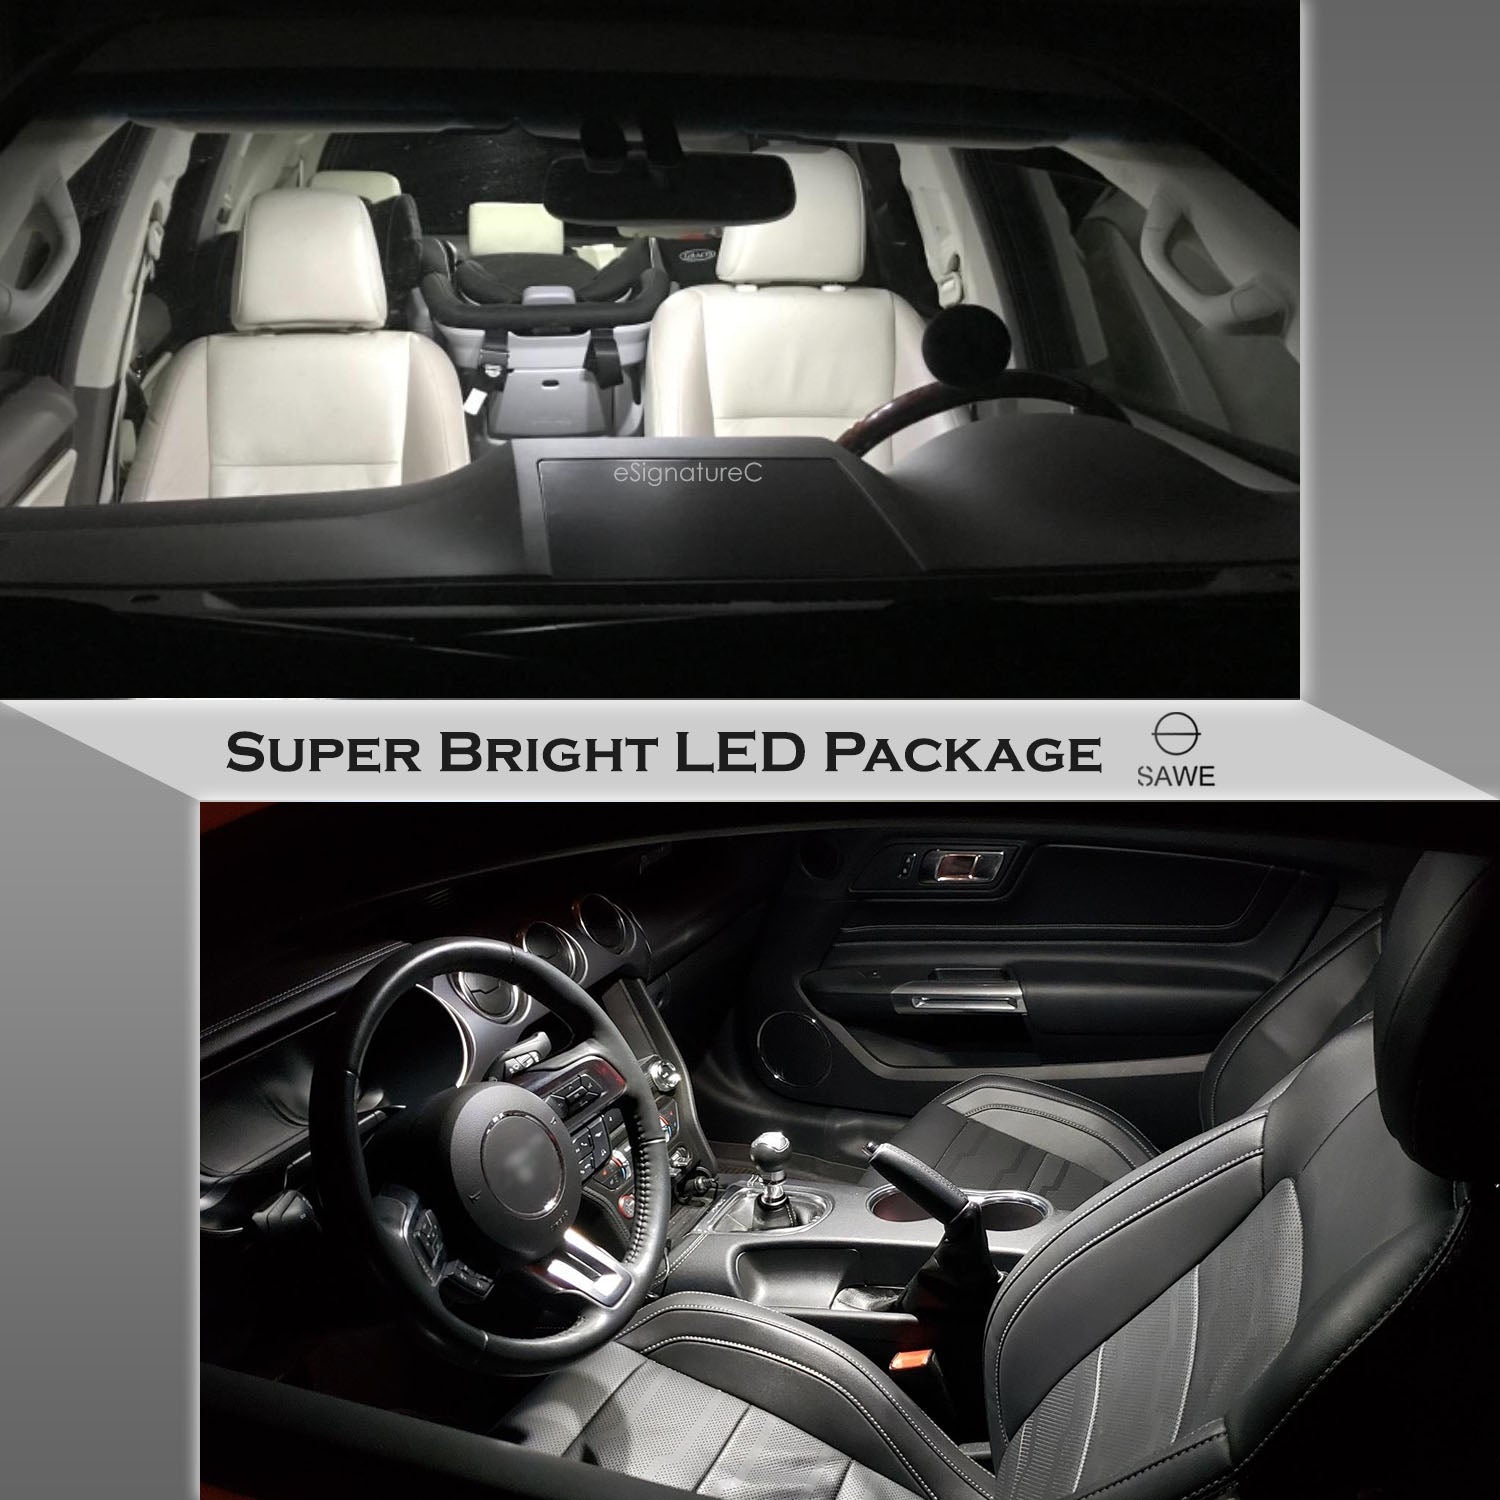 For Toyota Sienna Interior LED Lights - Dome & Map Lights Package Kit for 1998 - 2003 - White